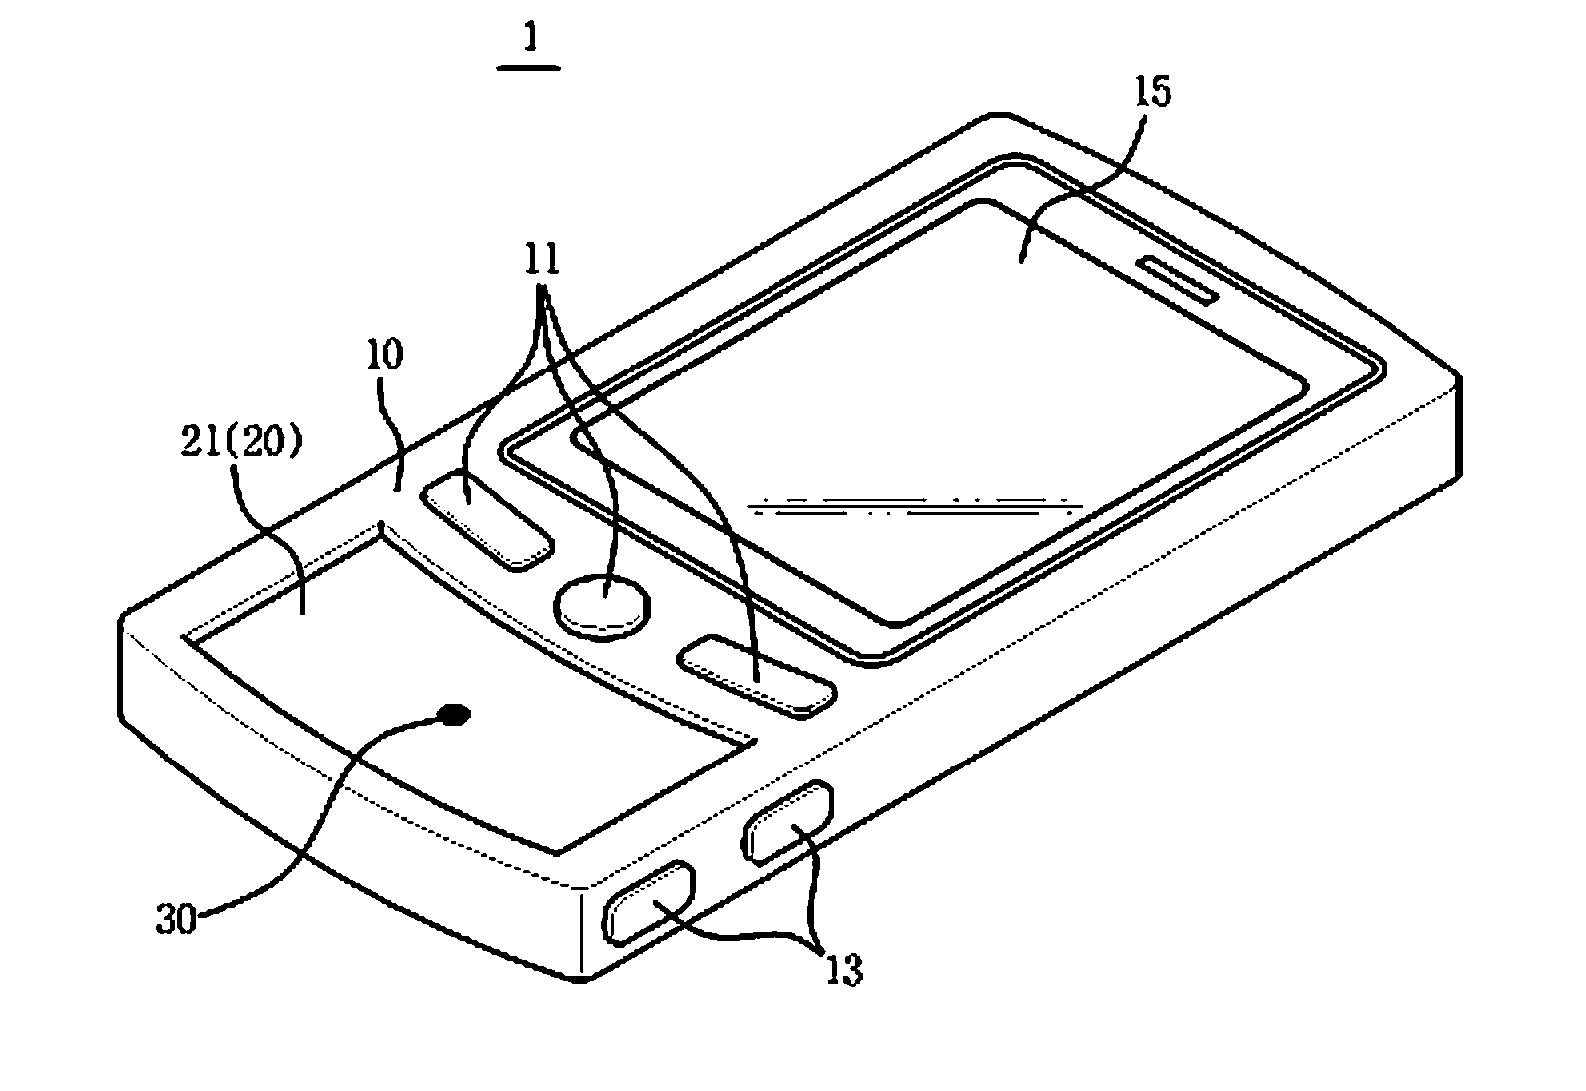 Character input device